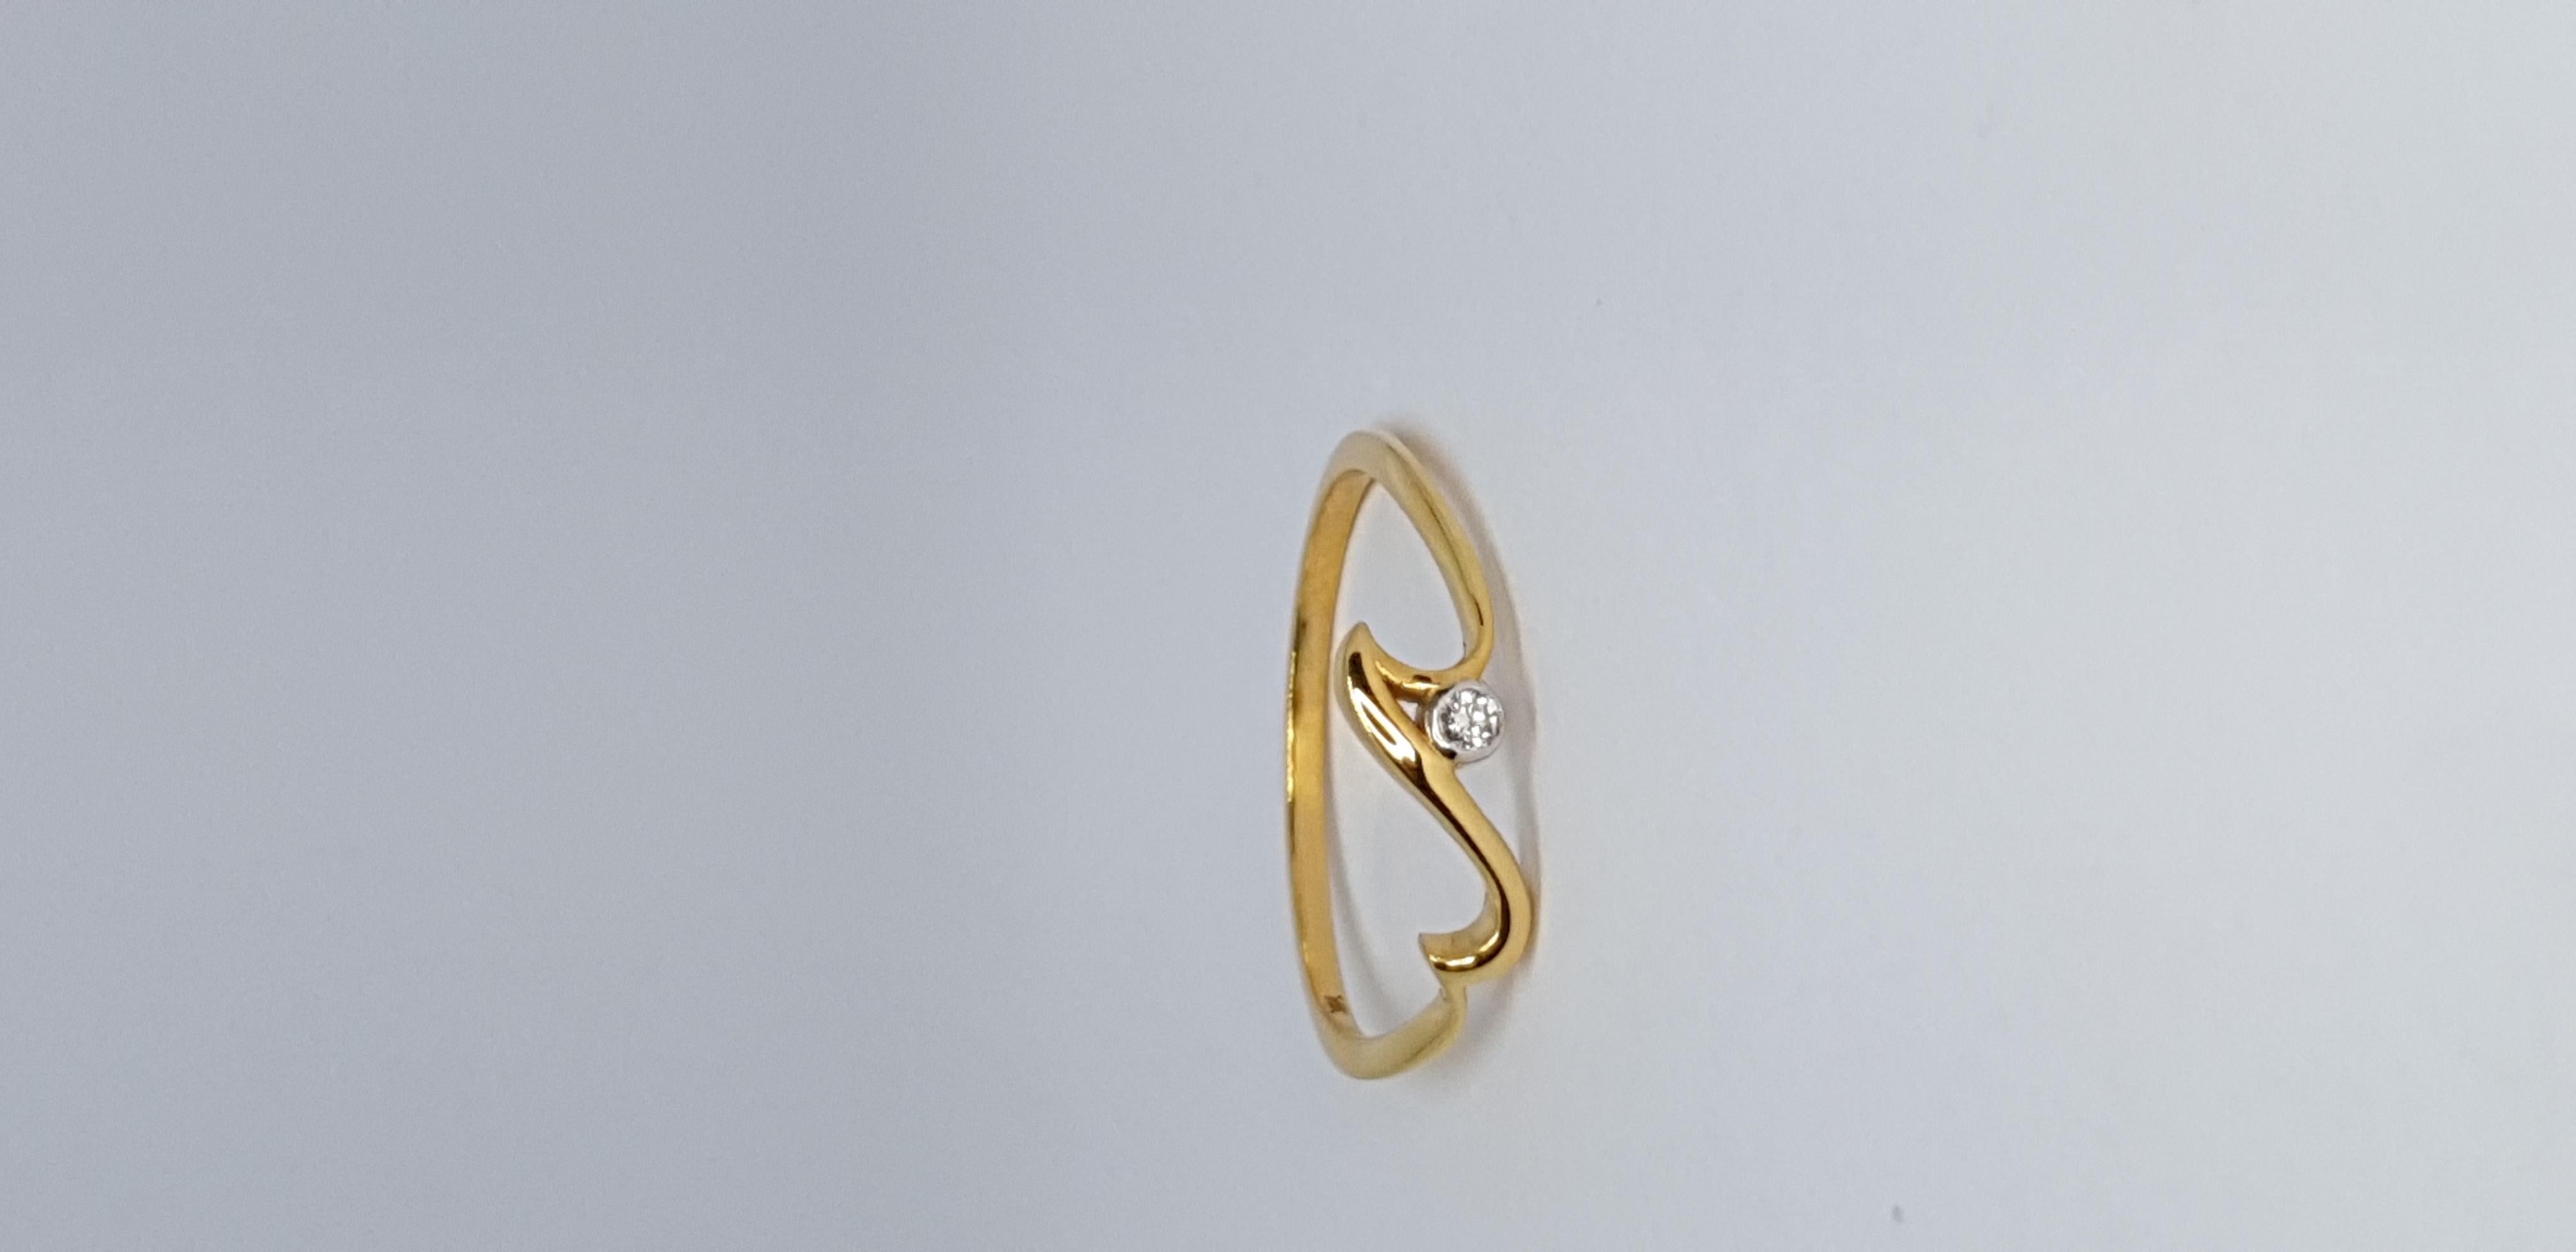 For Sale:  Natural Diamond Wave Ring 14K Solid Gold Dainty Ocean Lover Jewelry Gift. 18